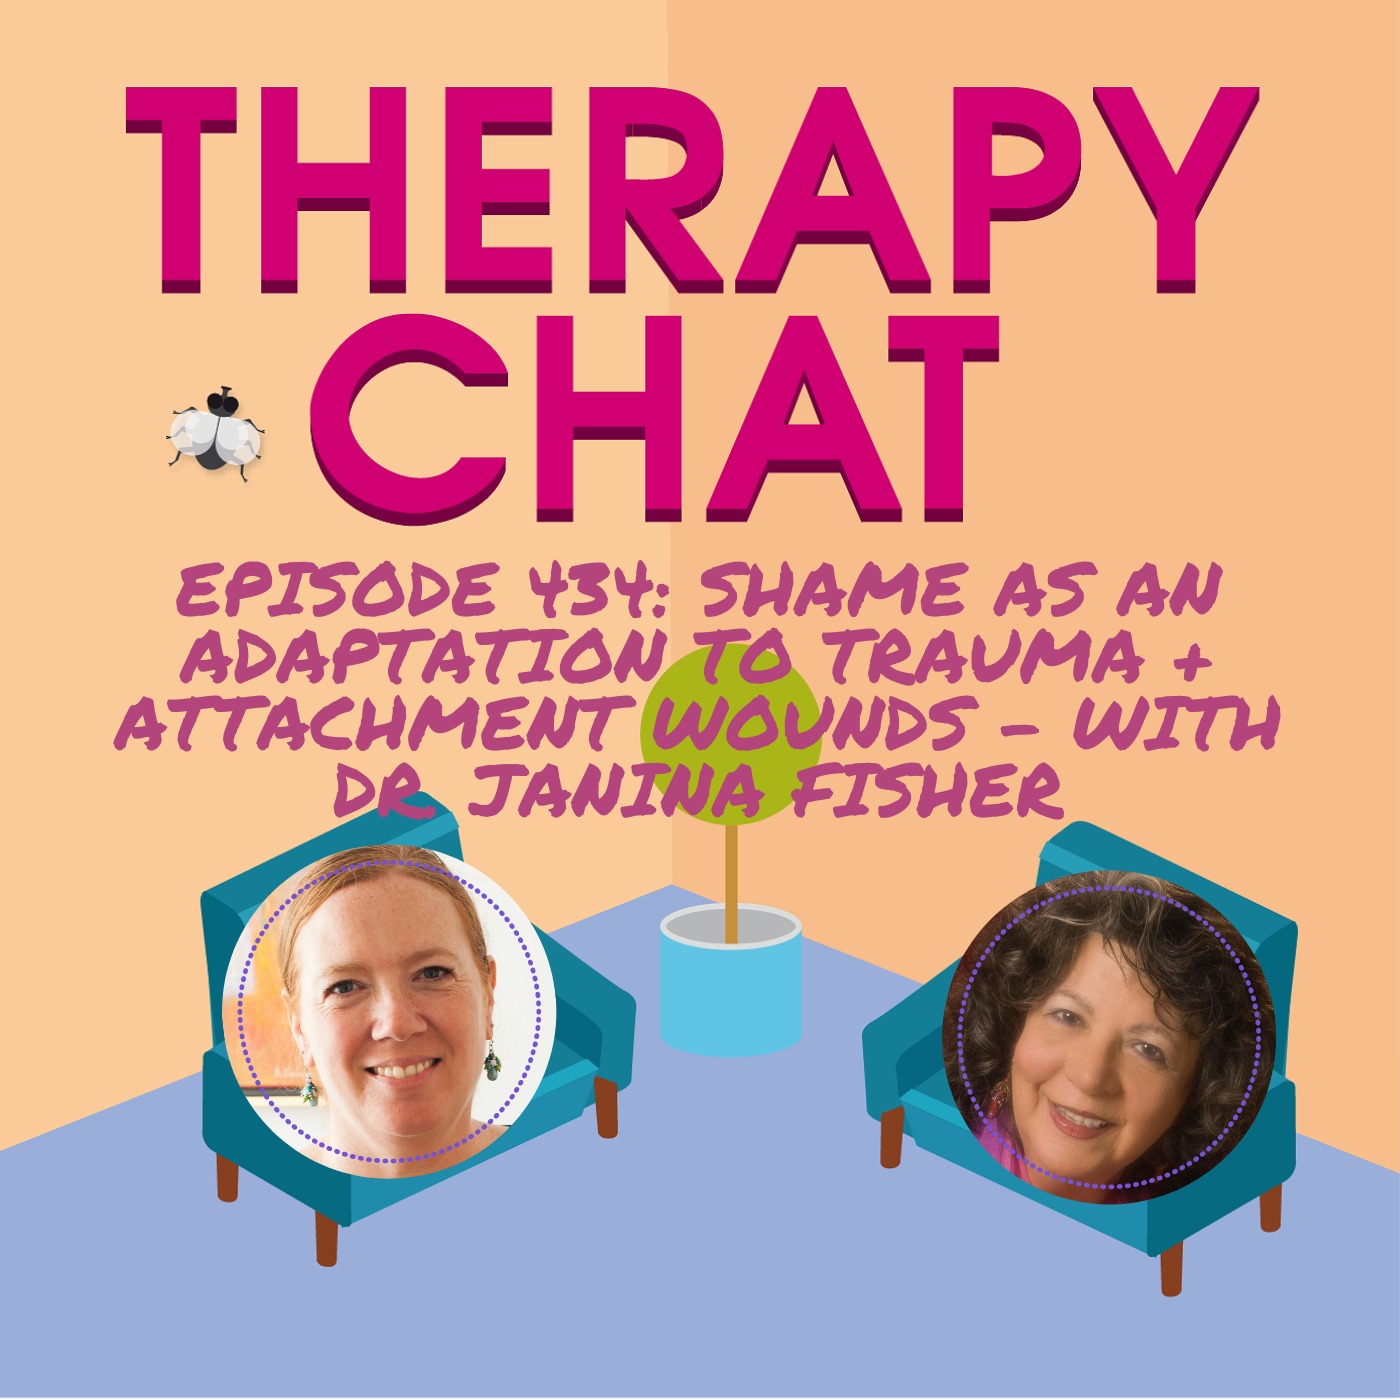 434: Shame As An Adaptation To Trauma + Attachment Wounds with Dr. Janina Fisher